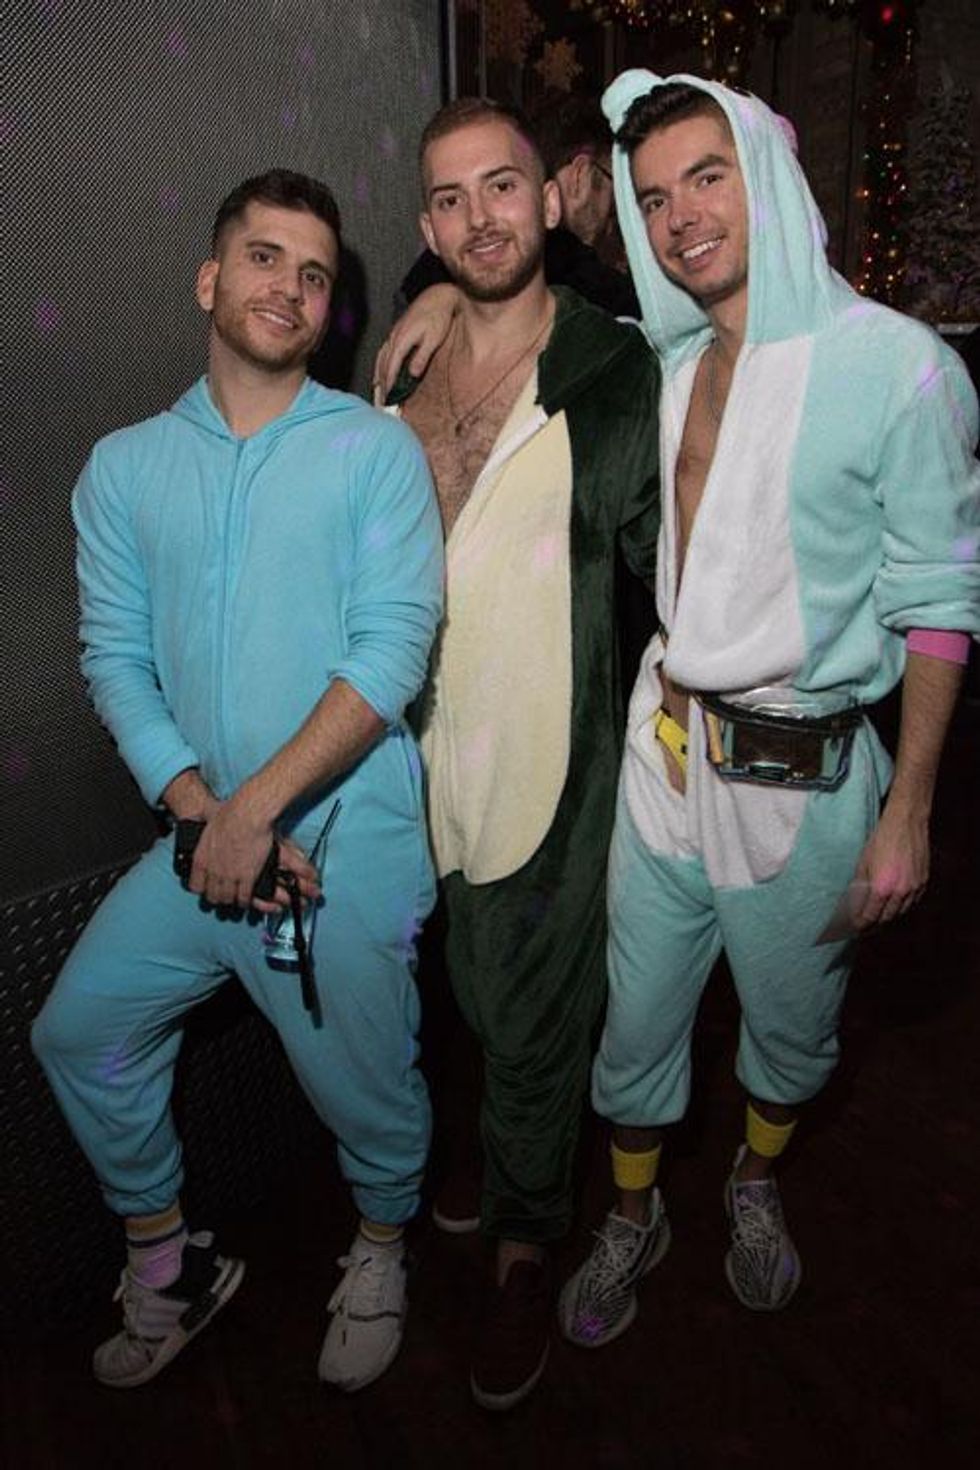 85 Pics of Hotties in New Year's Onesies at Sidetrack Gay Bar